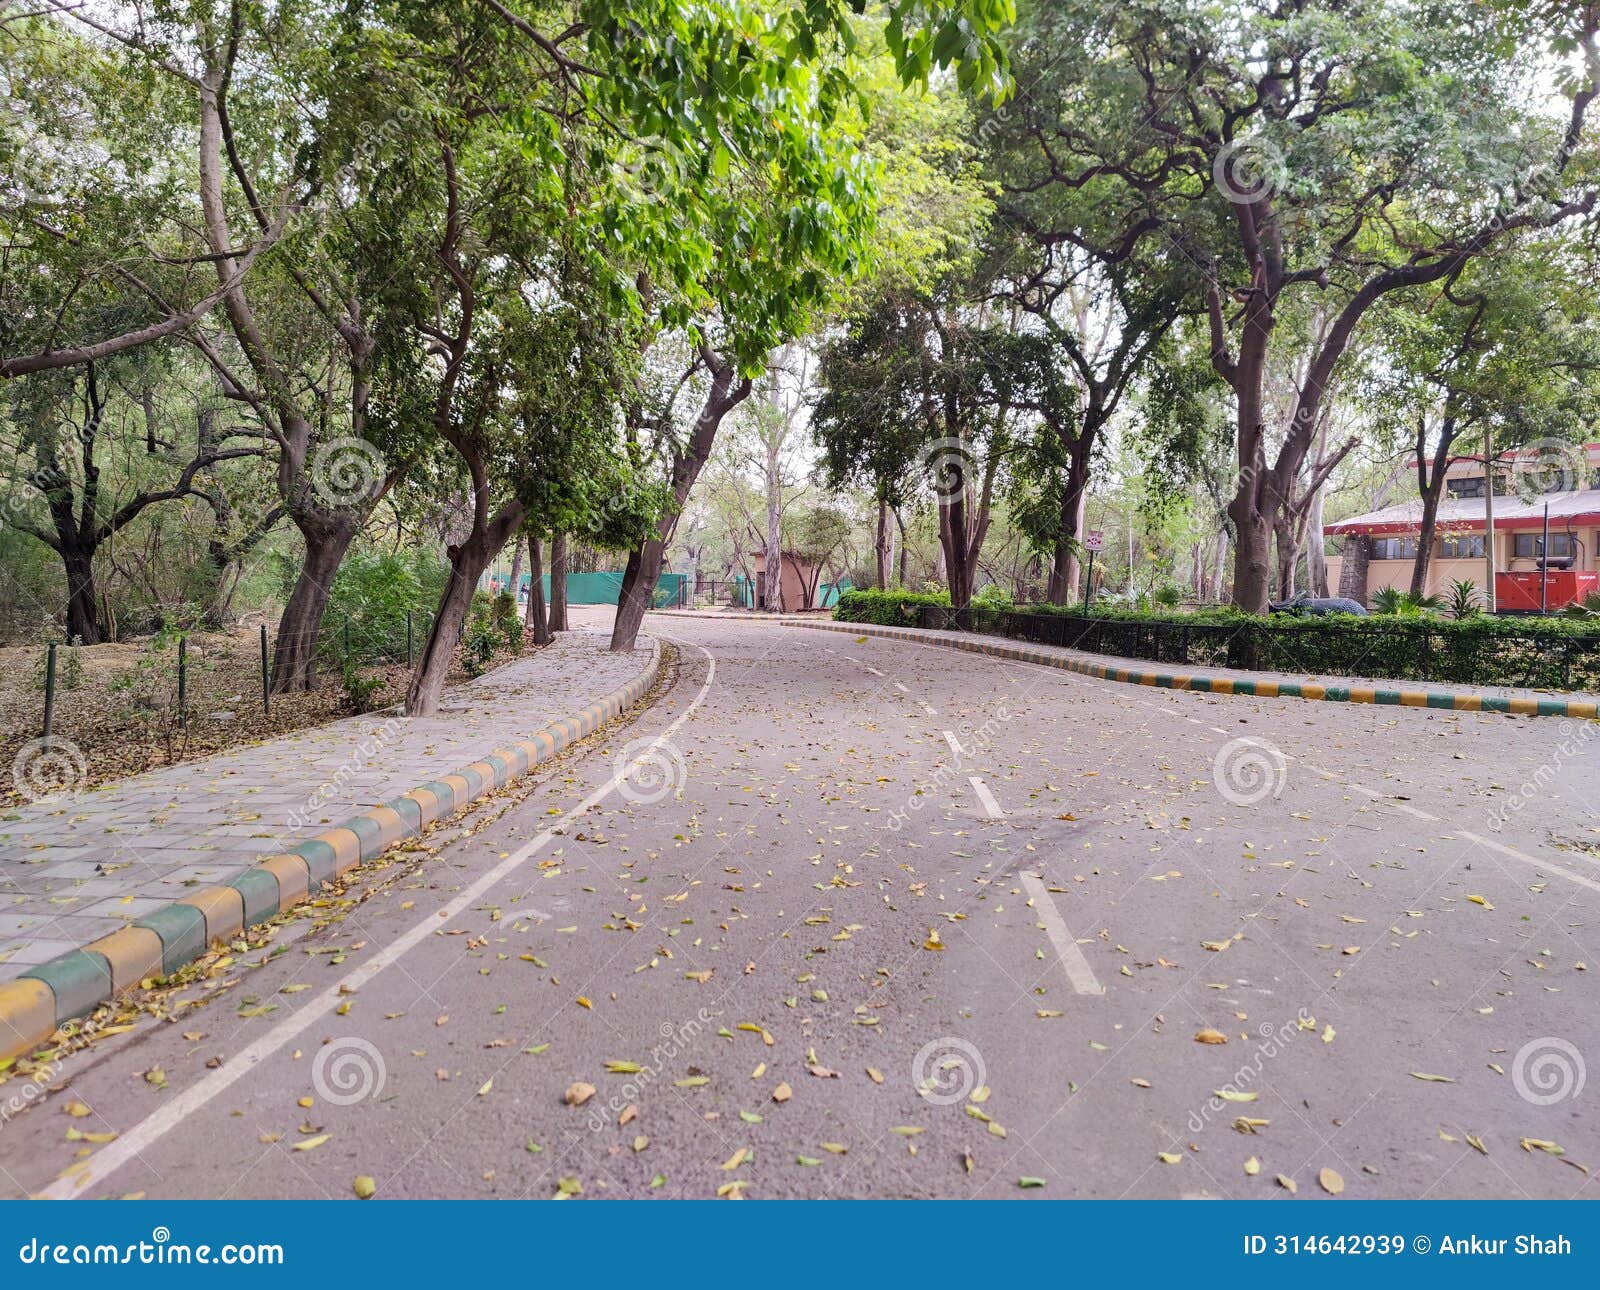 walkway to delhi zoological park surrounded by trees